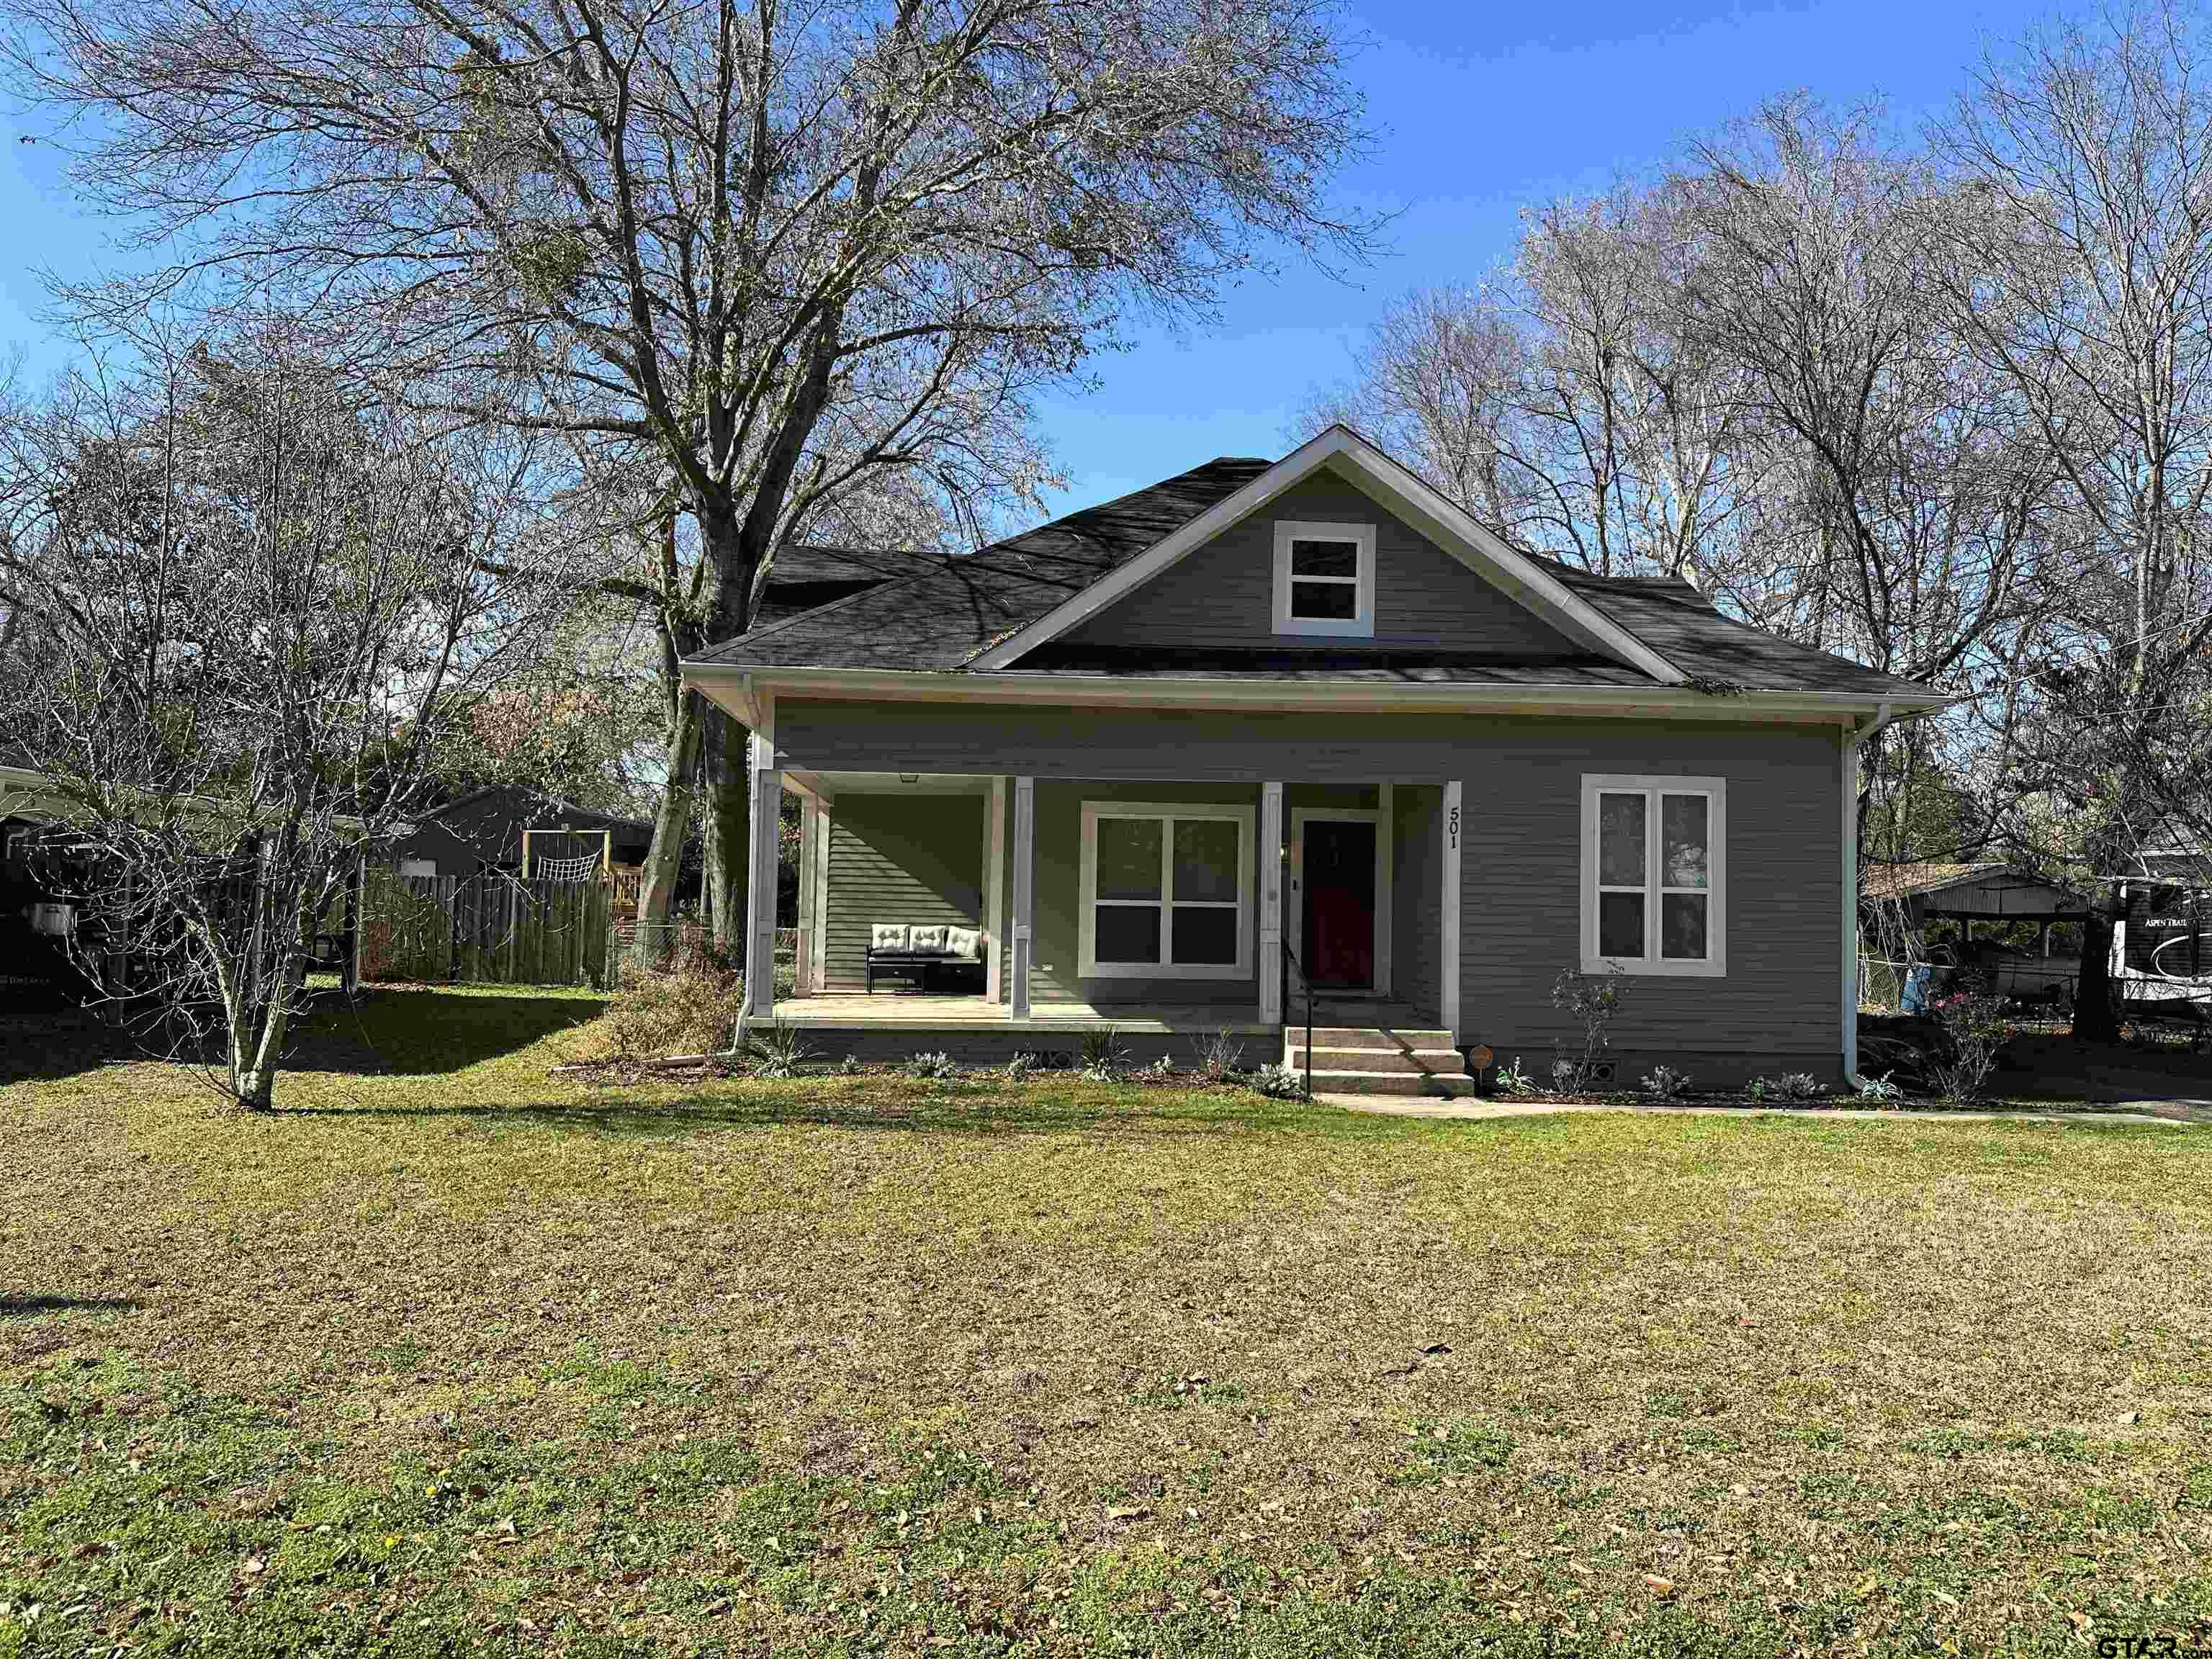 501 BOYD ST, Lindale, Texas 75771, 3 Bedrooms Bedrooms, ,2 BathroomsBathrooms,Single Family Detached,For Sale,BOYD ST,24004158